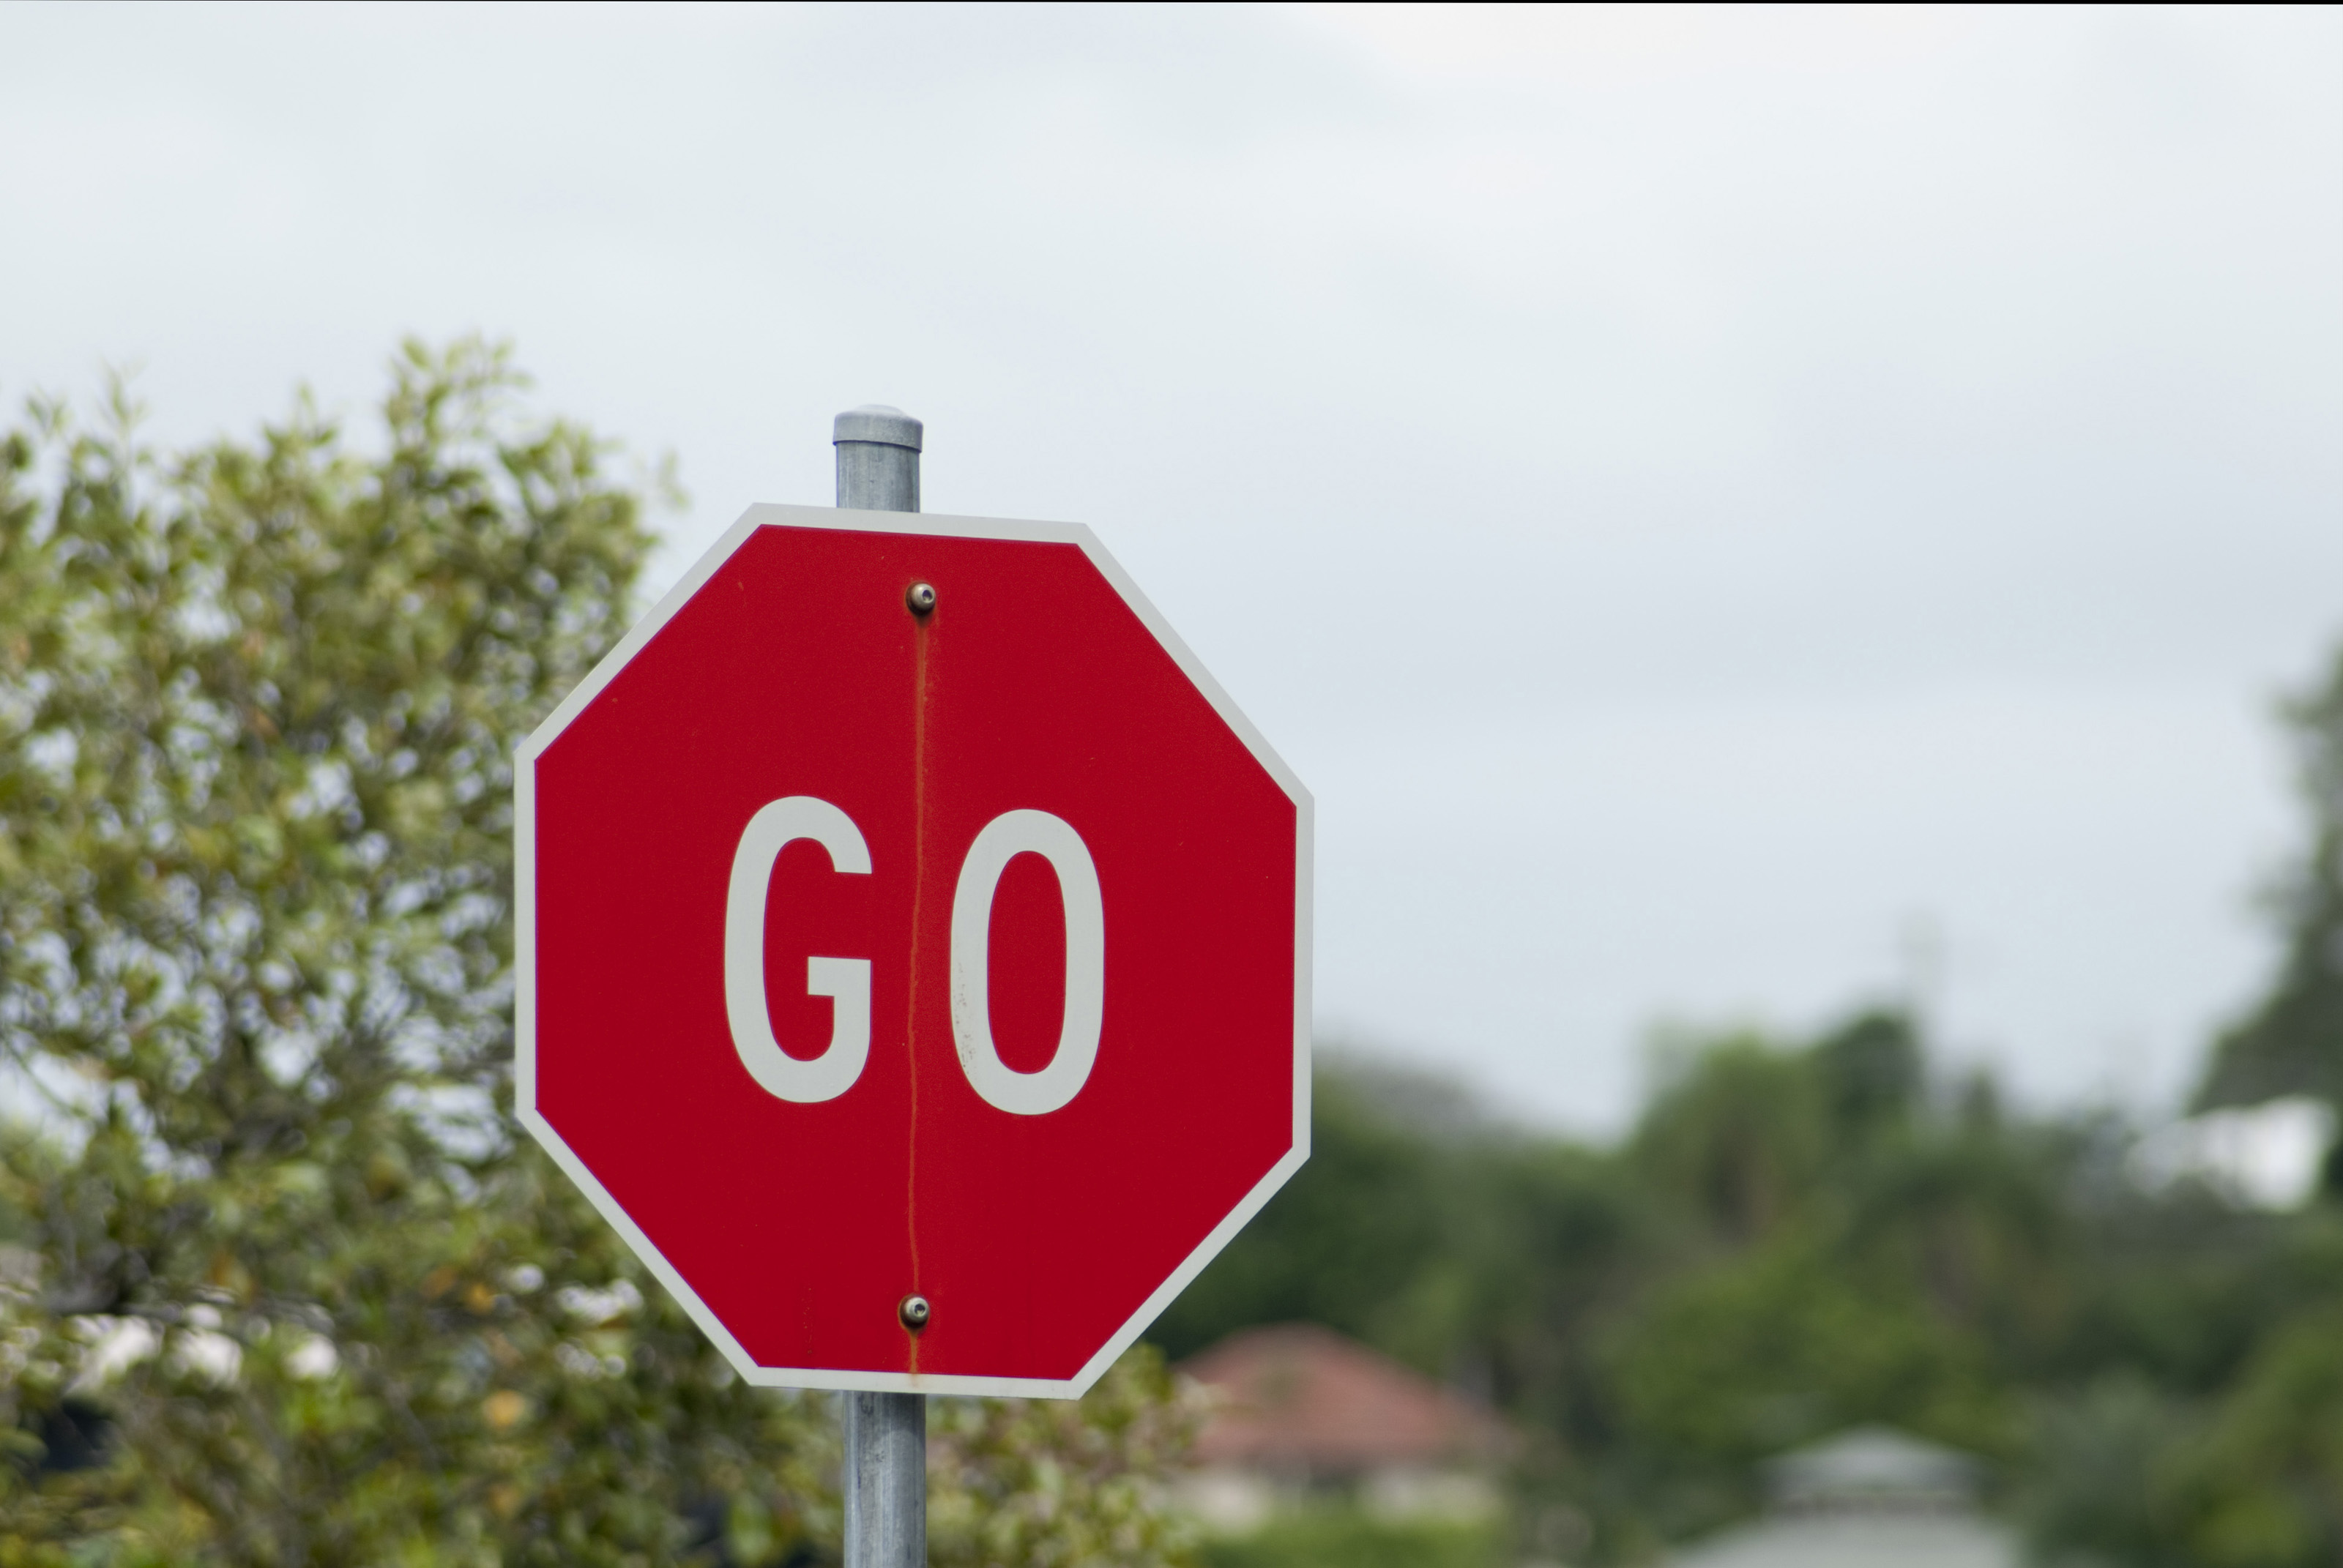 STOP / GO, Traffic Signs